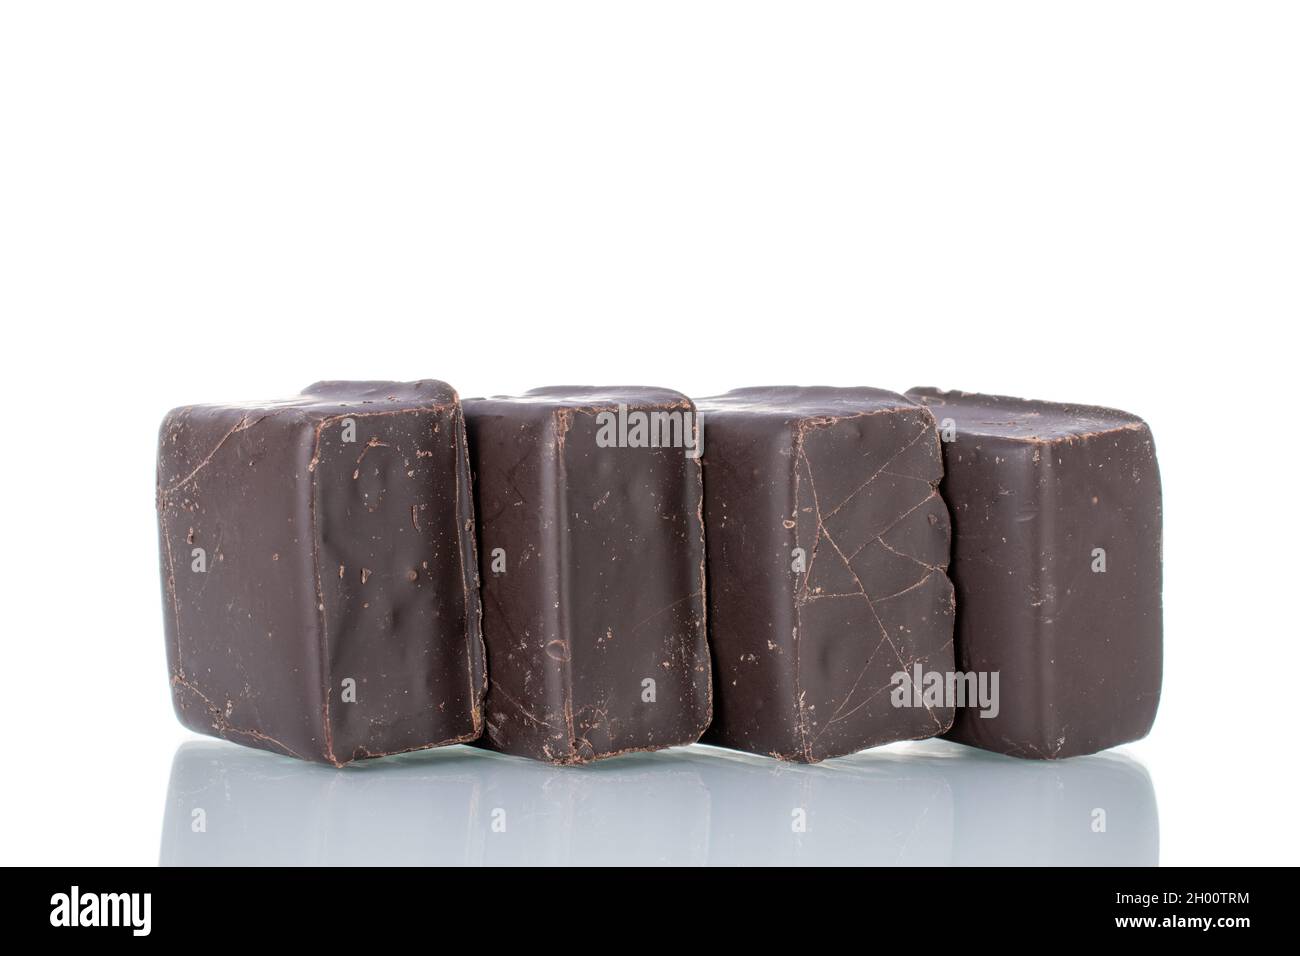 Several sweet chocolates, close-up, isolated on white. Stock Photo